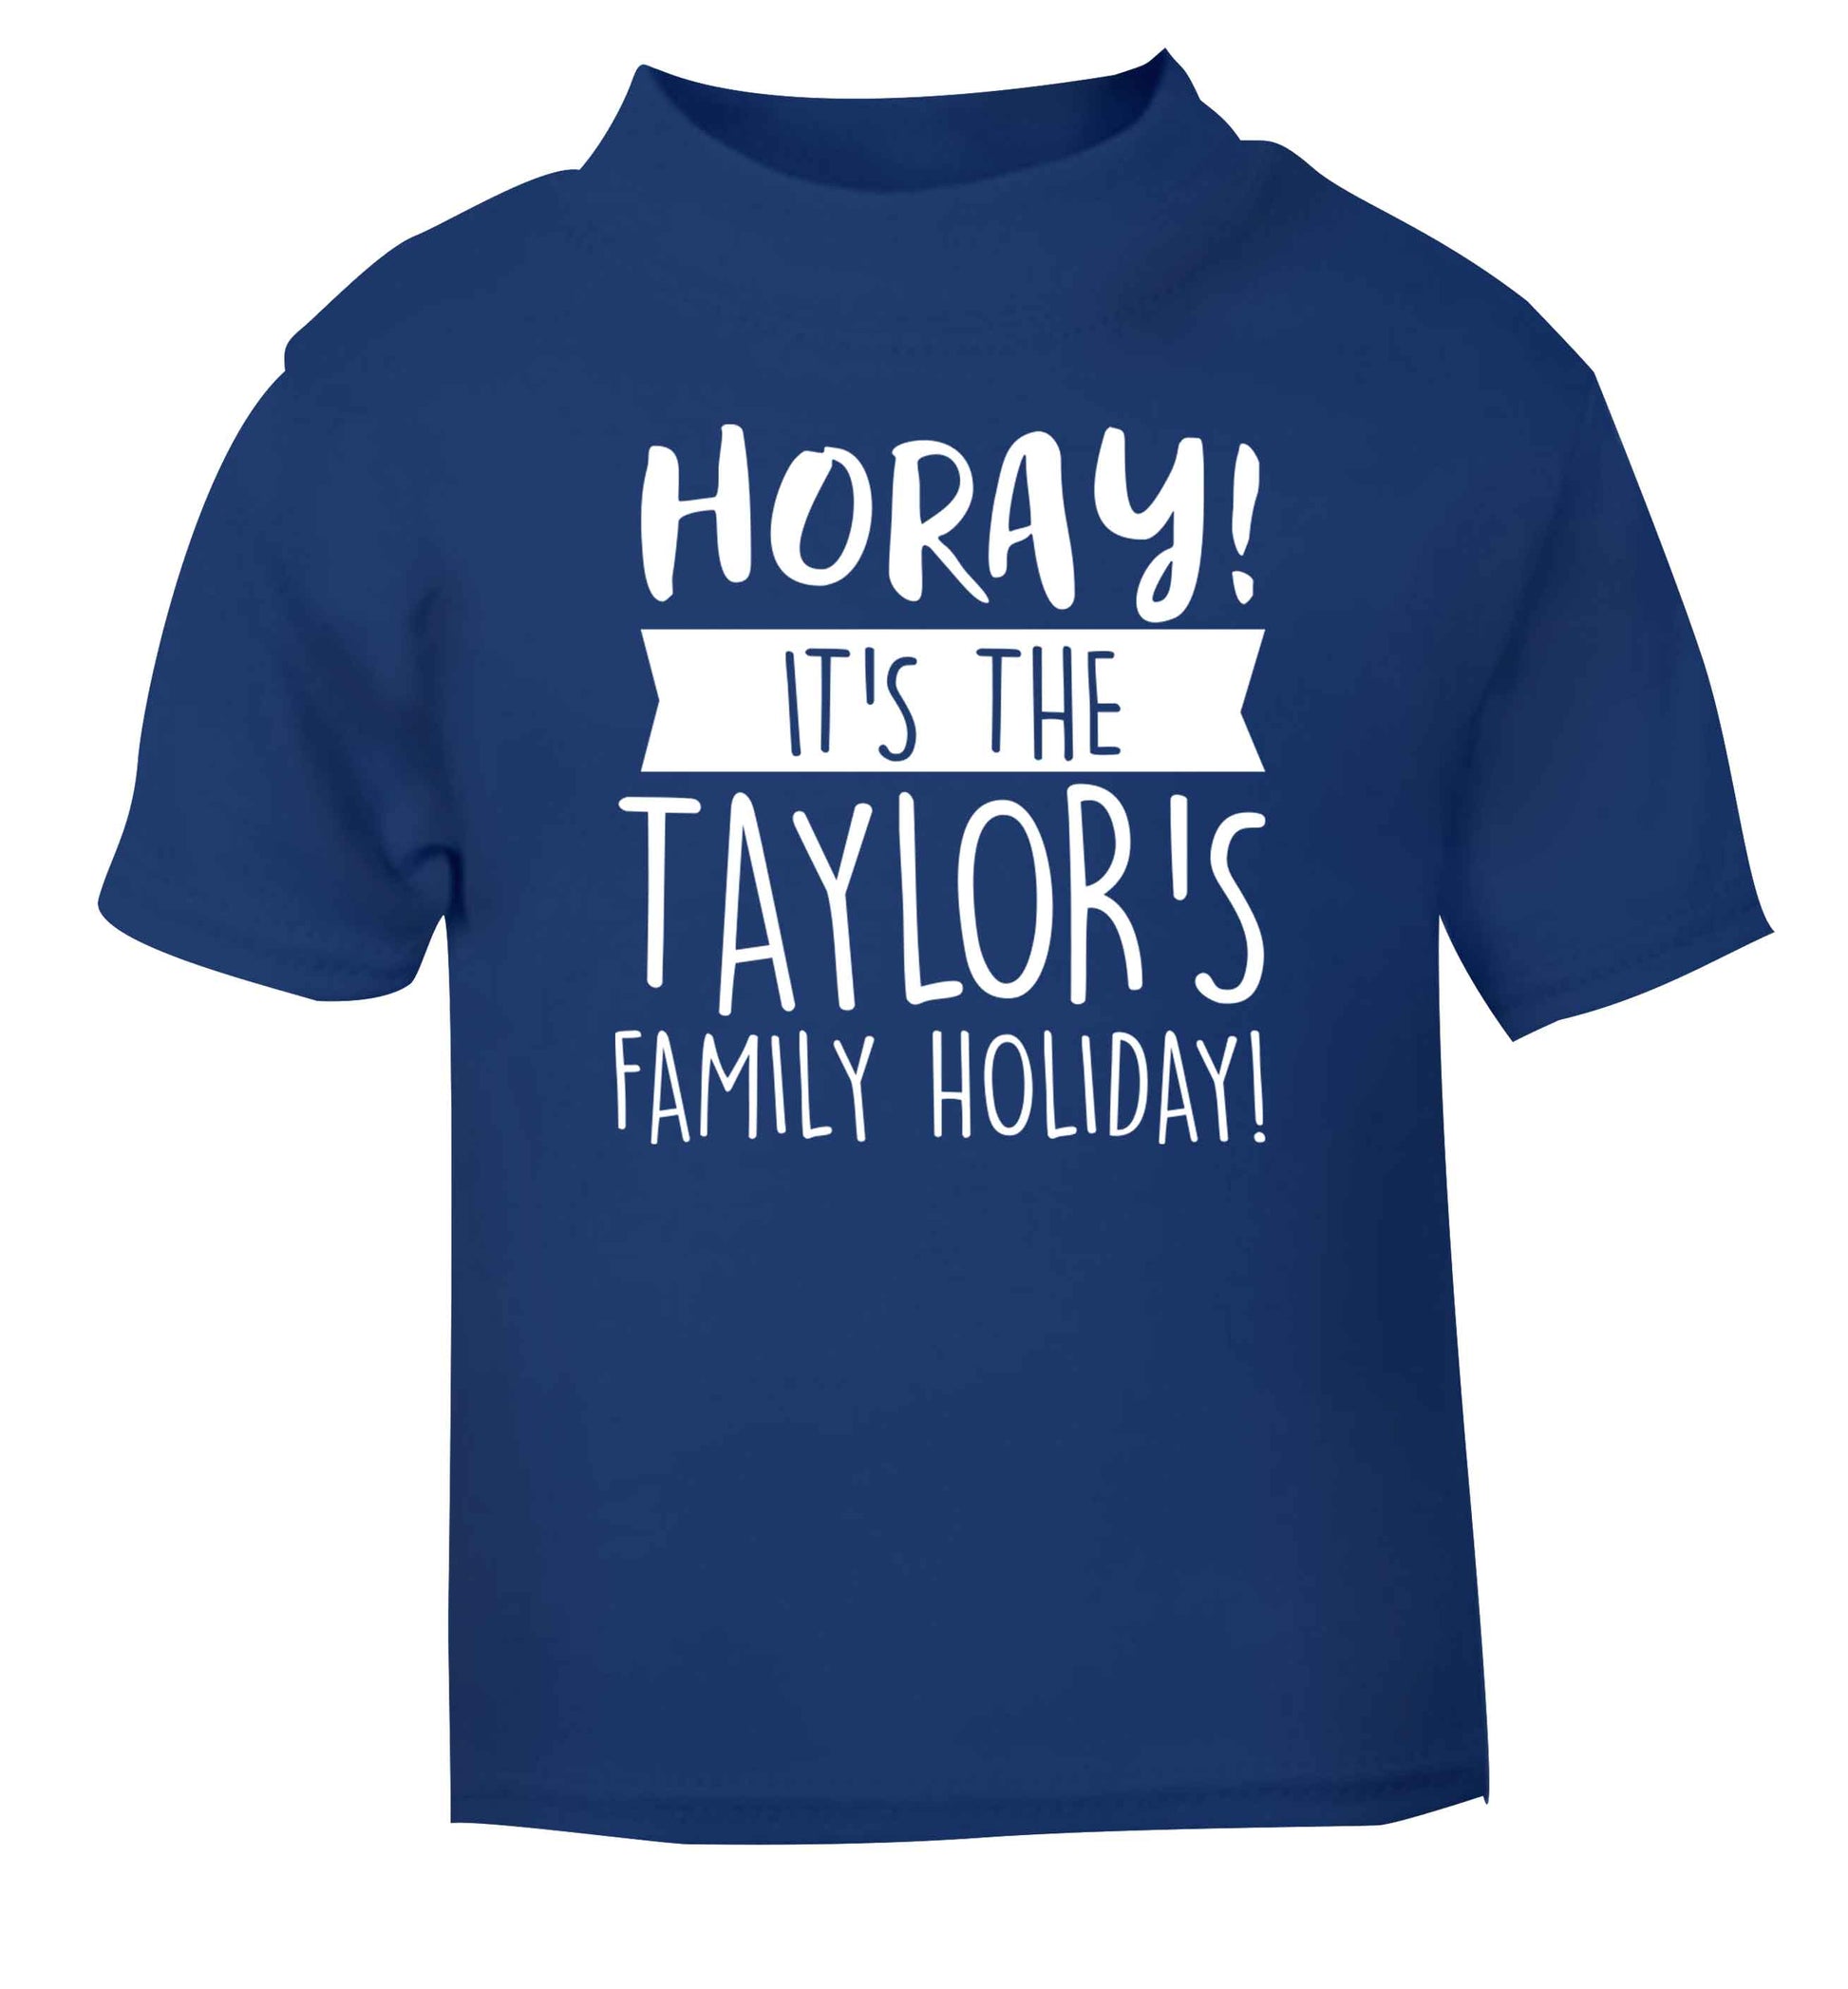 Horay it's the Taylor's family holiday! personalised item blue Baby Toddler Tshirt 2 Years